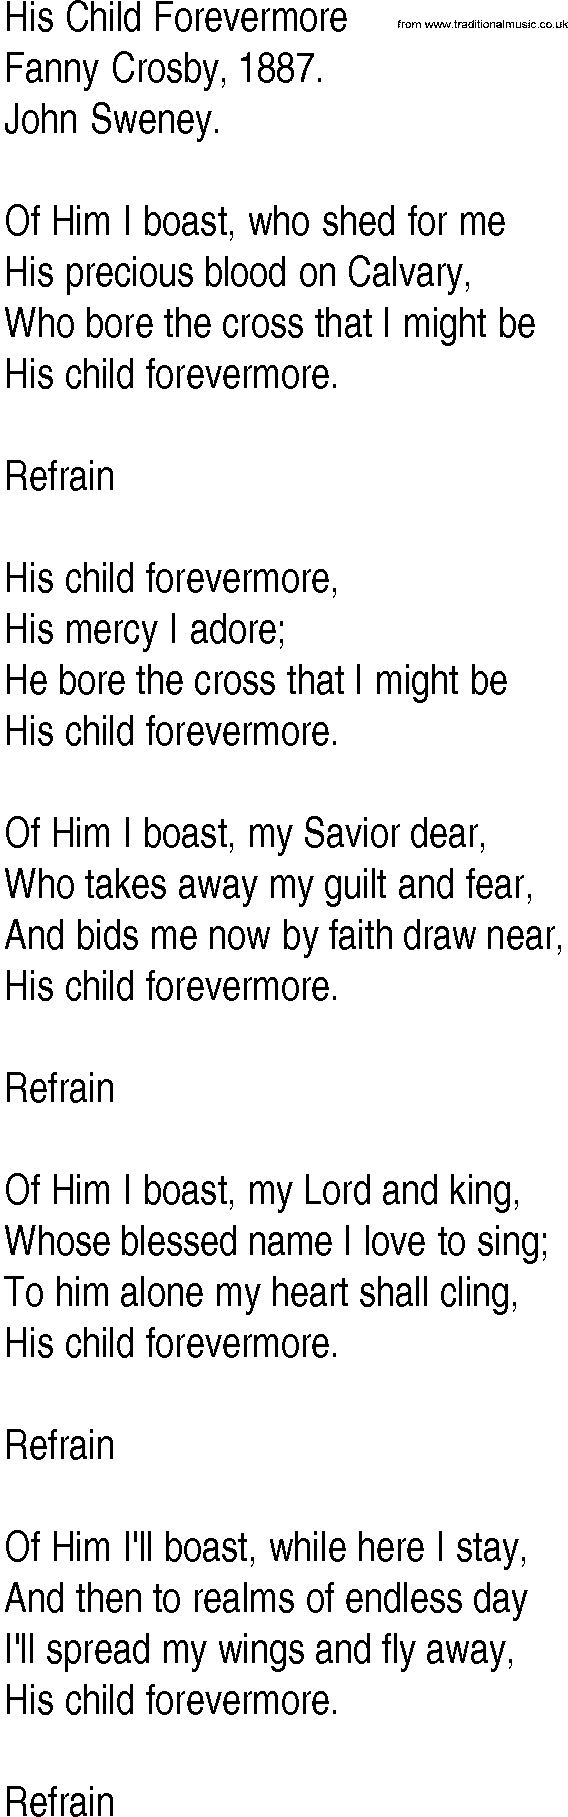 Hymn and Gospel Song: His Child Forevermore by Fanny Crosby lyrics